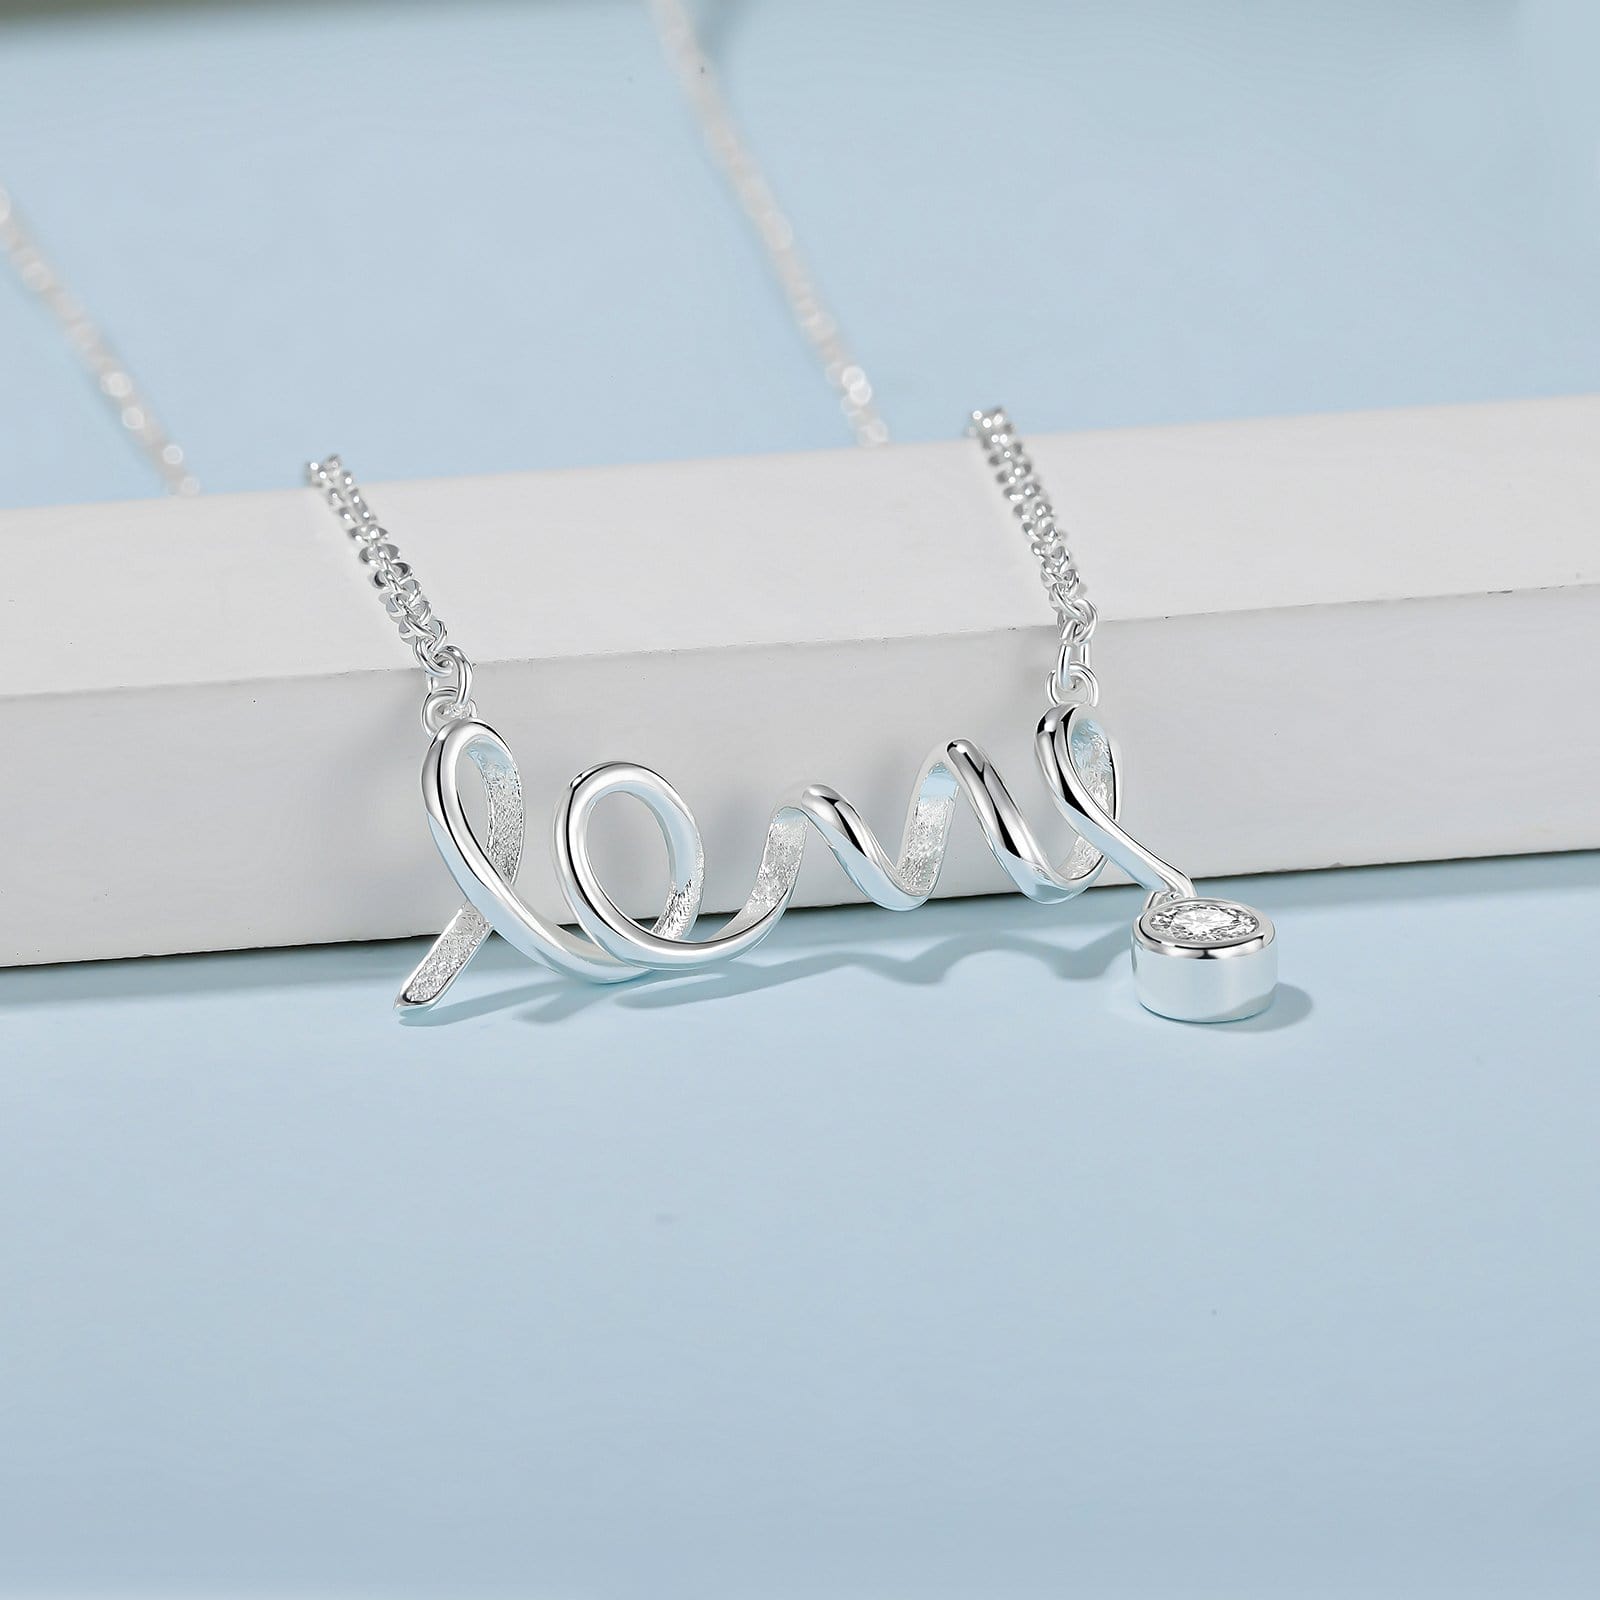 Necklaces To My Mom - Forever Thankful Love Pendant Necklace GiveMe-Gifts